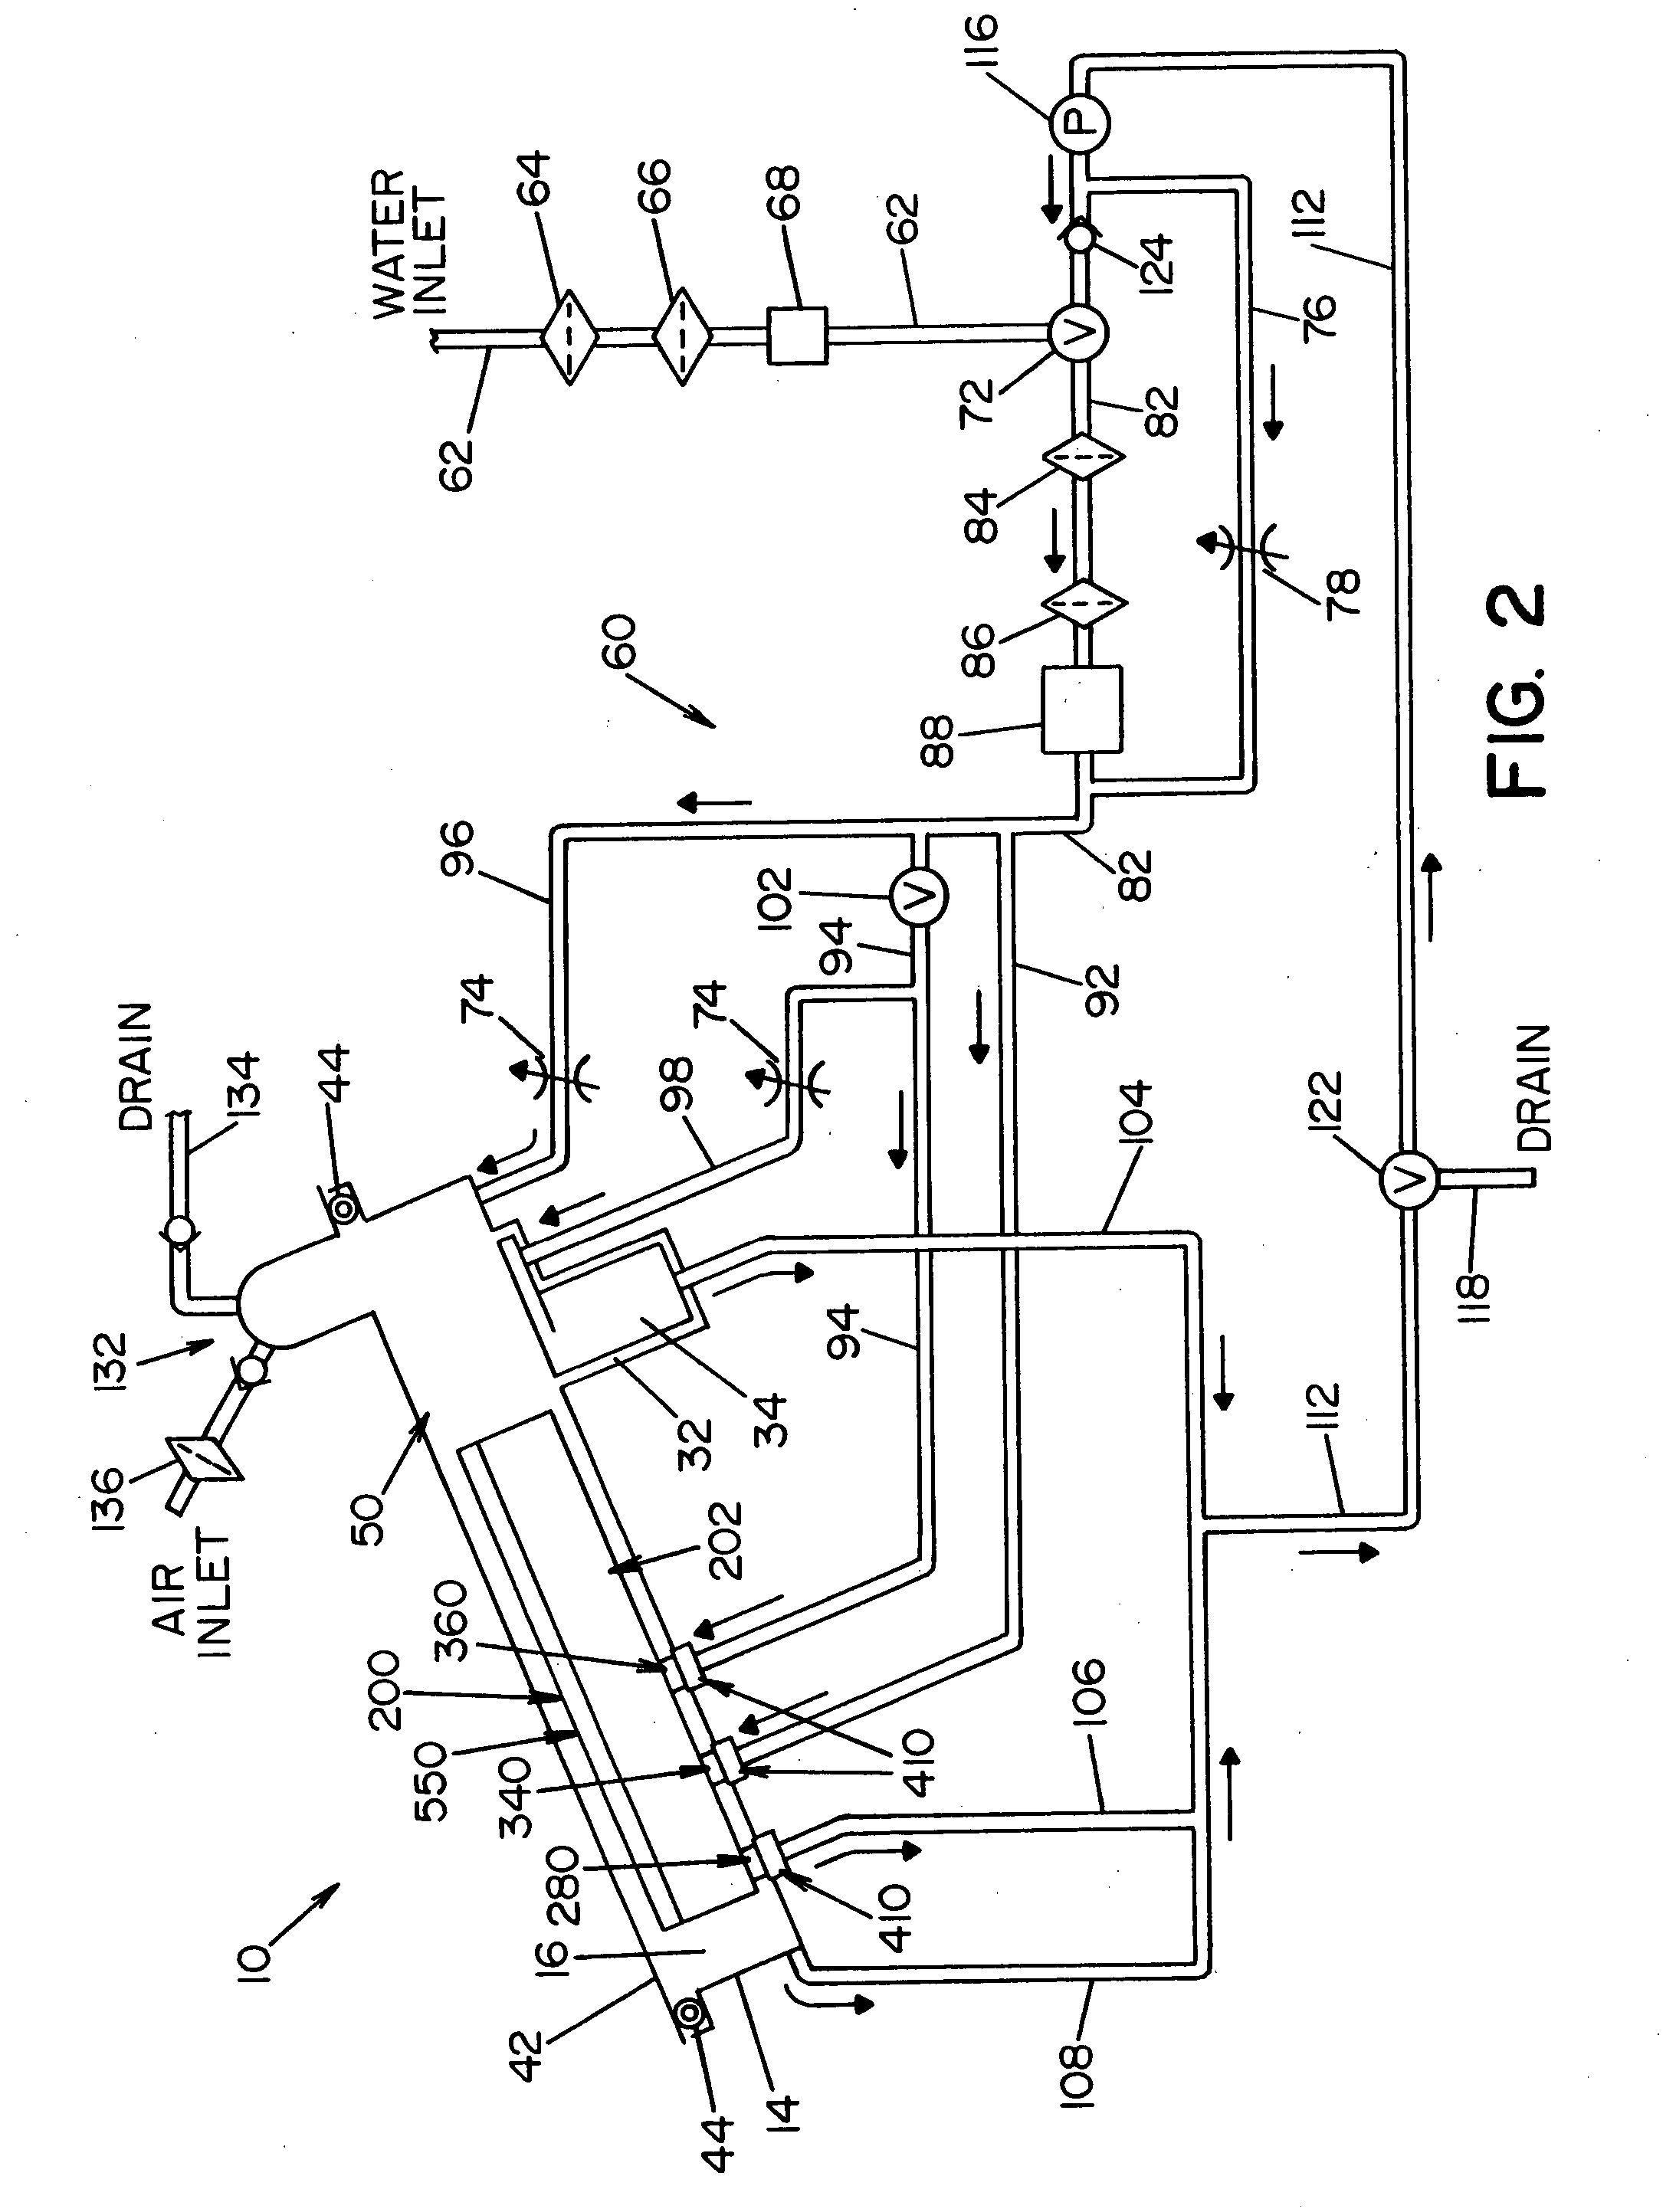 Method and device for deactivating items and for maintaining such items in a deactivated state